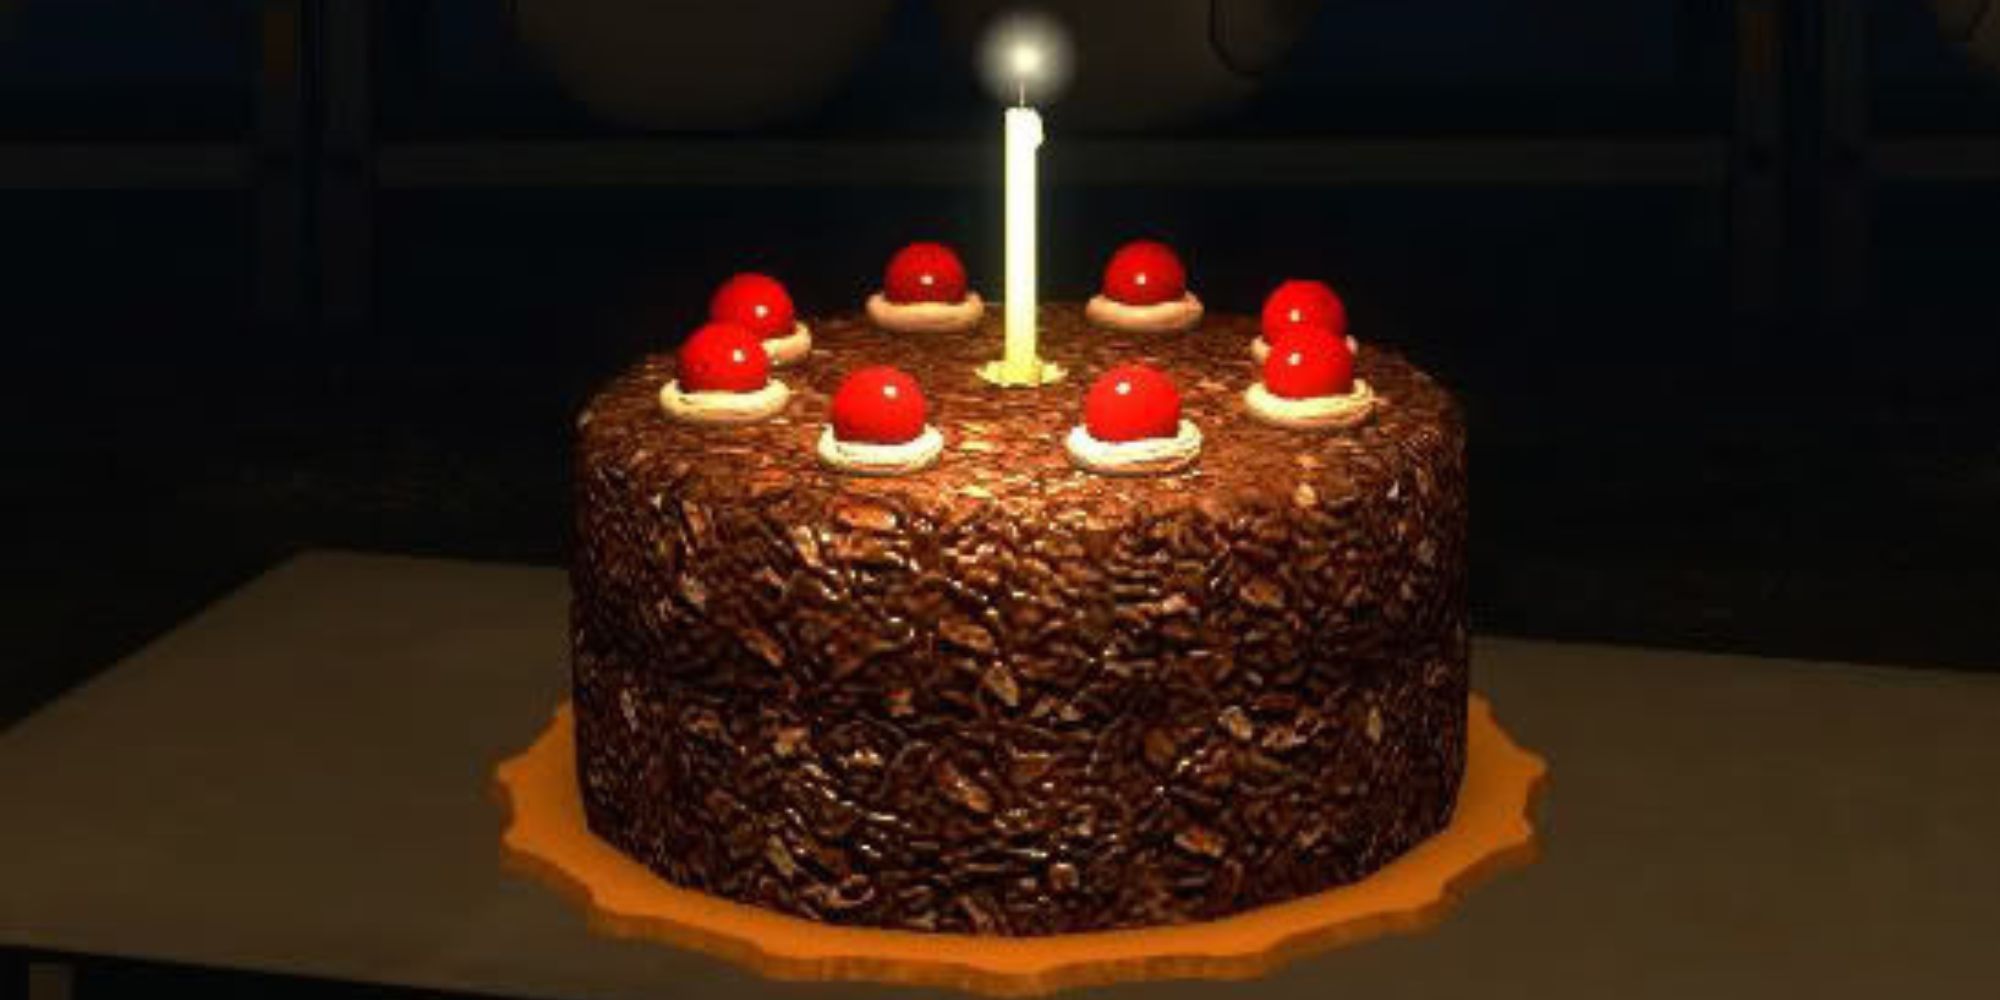 The cake at the end of Portal covered in lit candles on a table